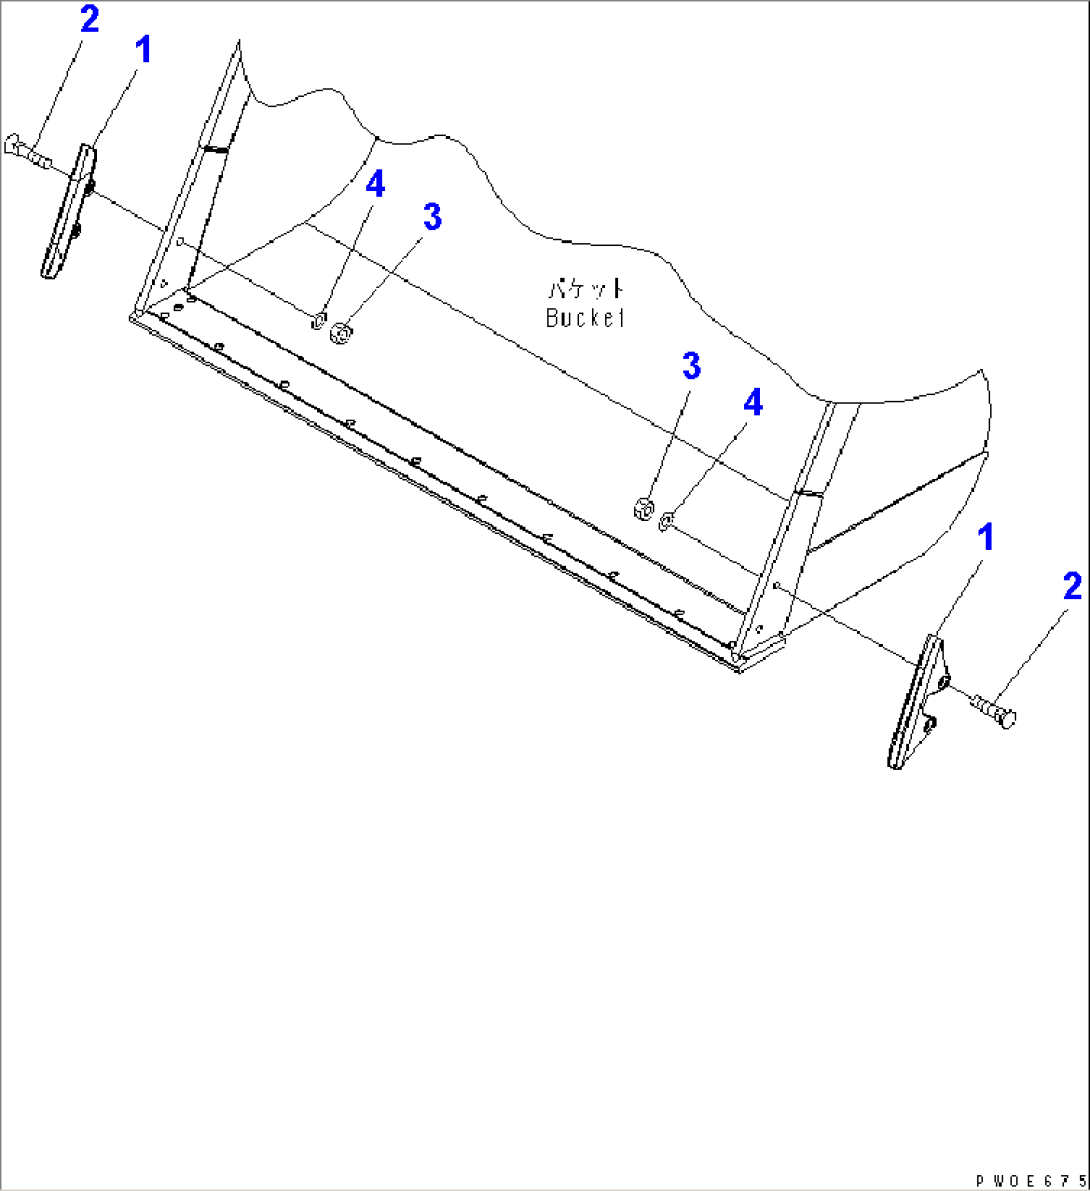 SIDE GUARD (FOR EXCAVATING BUCKET)